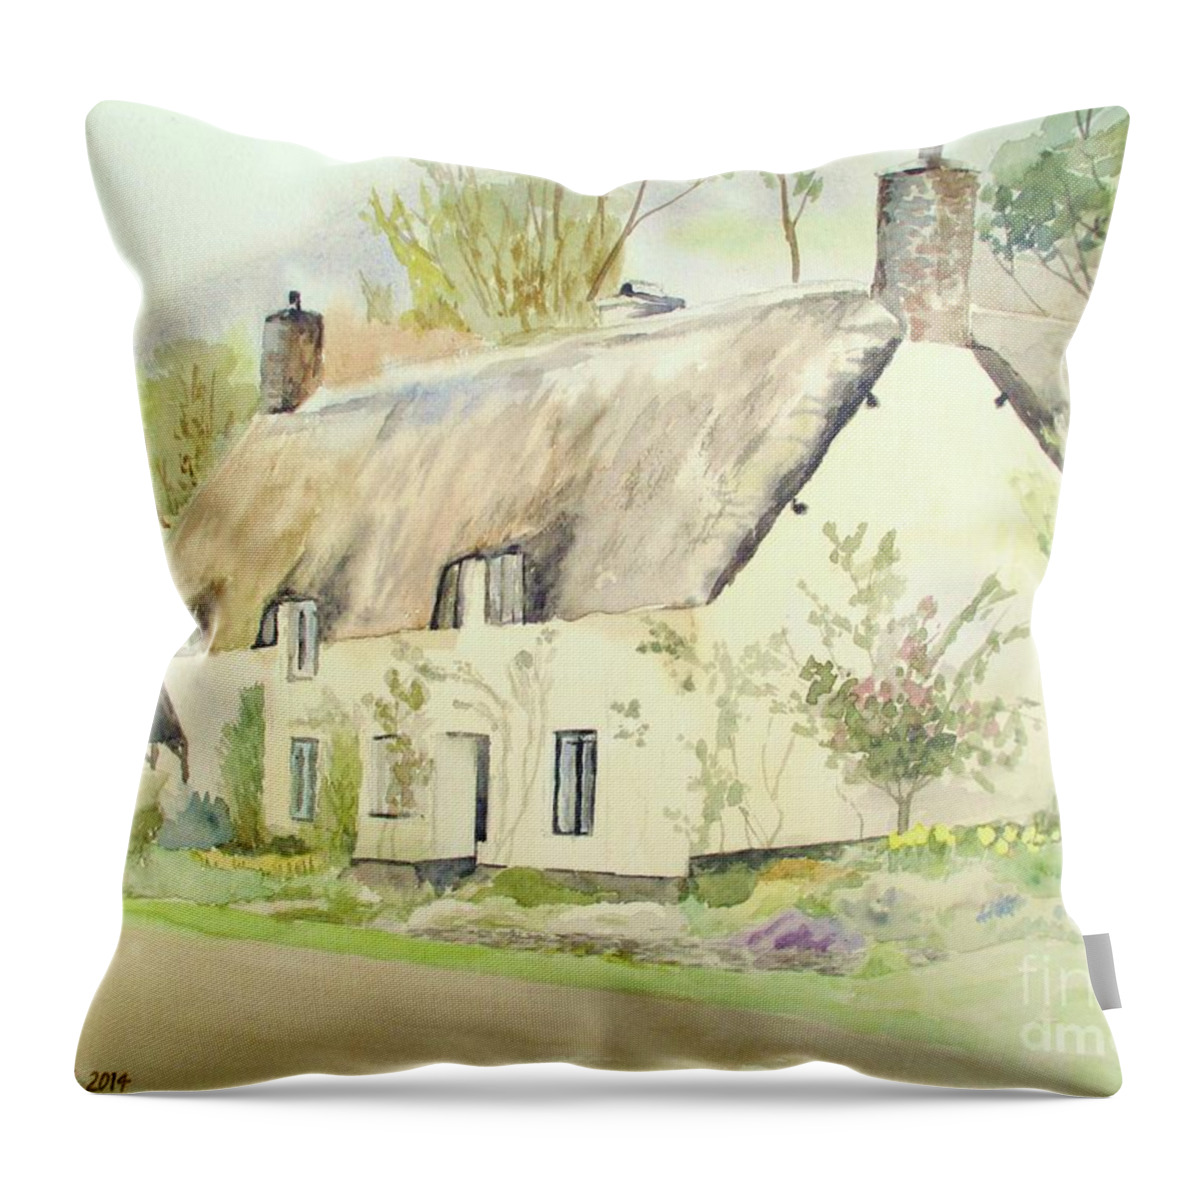 Dunster Throw Pillow featuring the painting Picturesque Dunster Cottage by Martin Howard